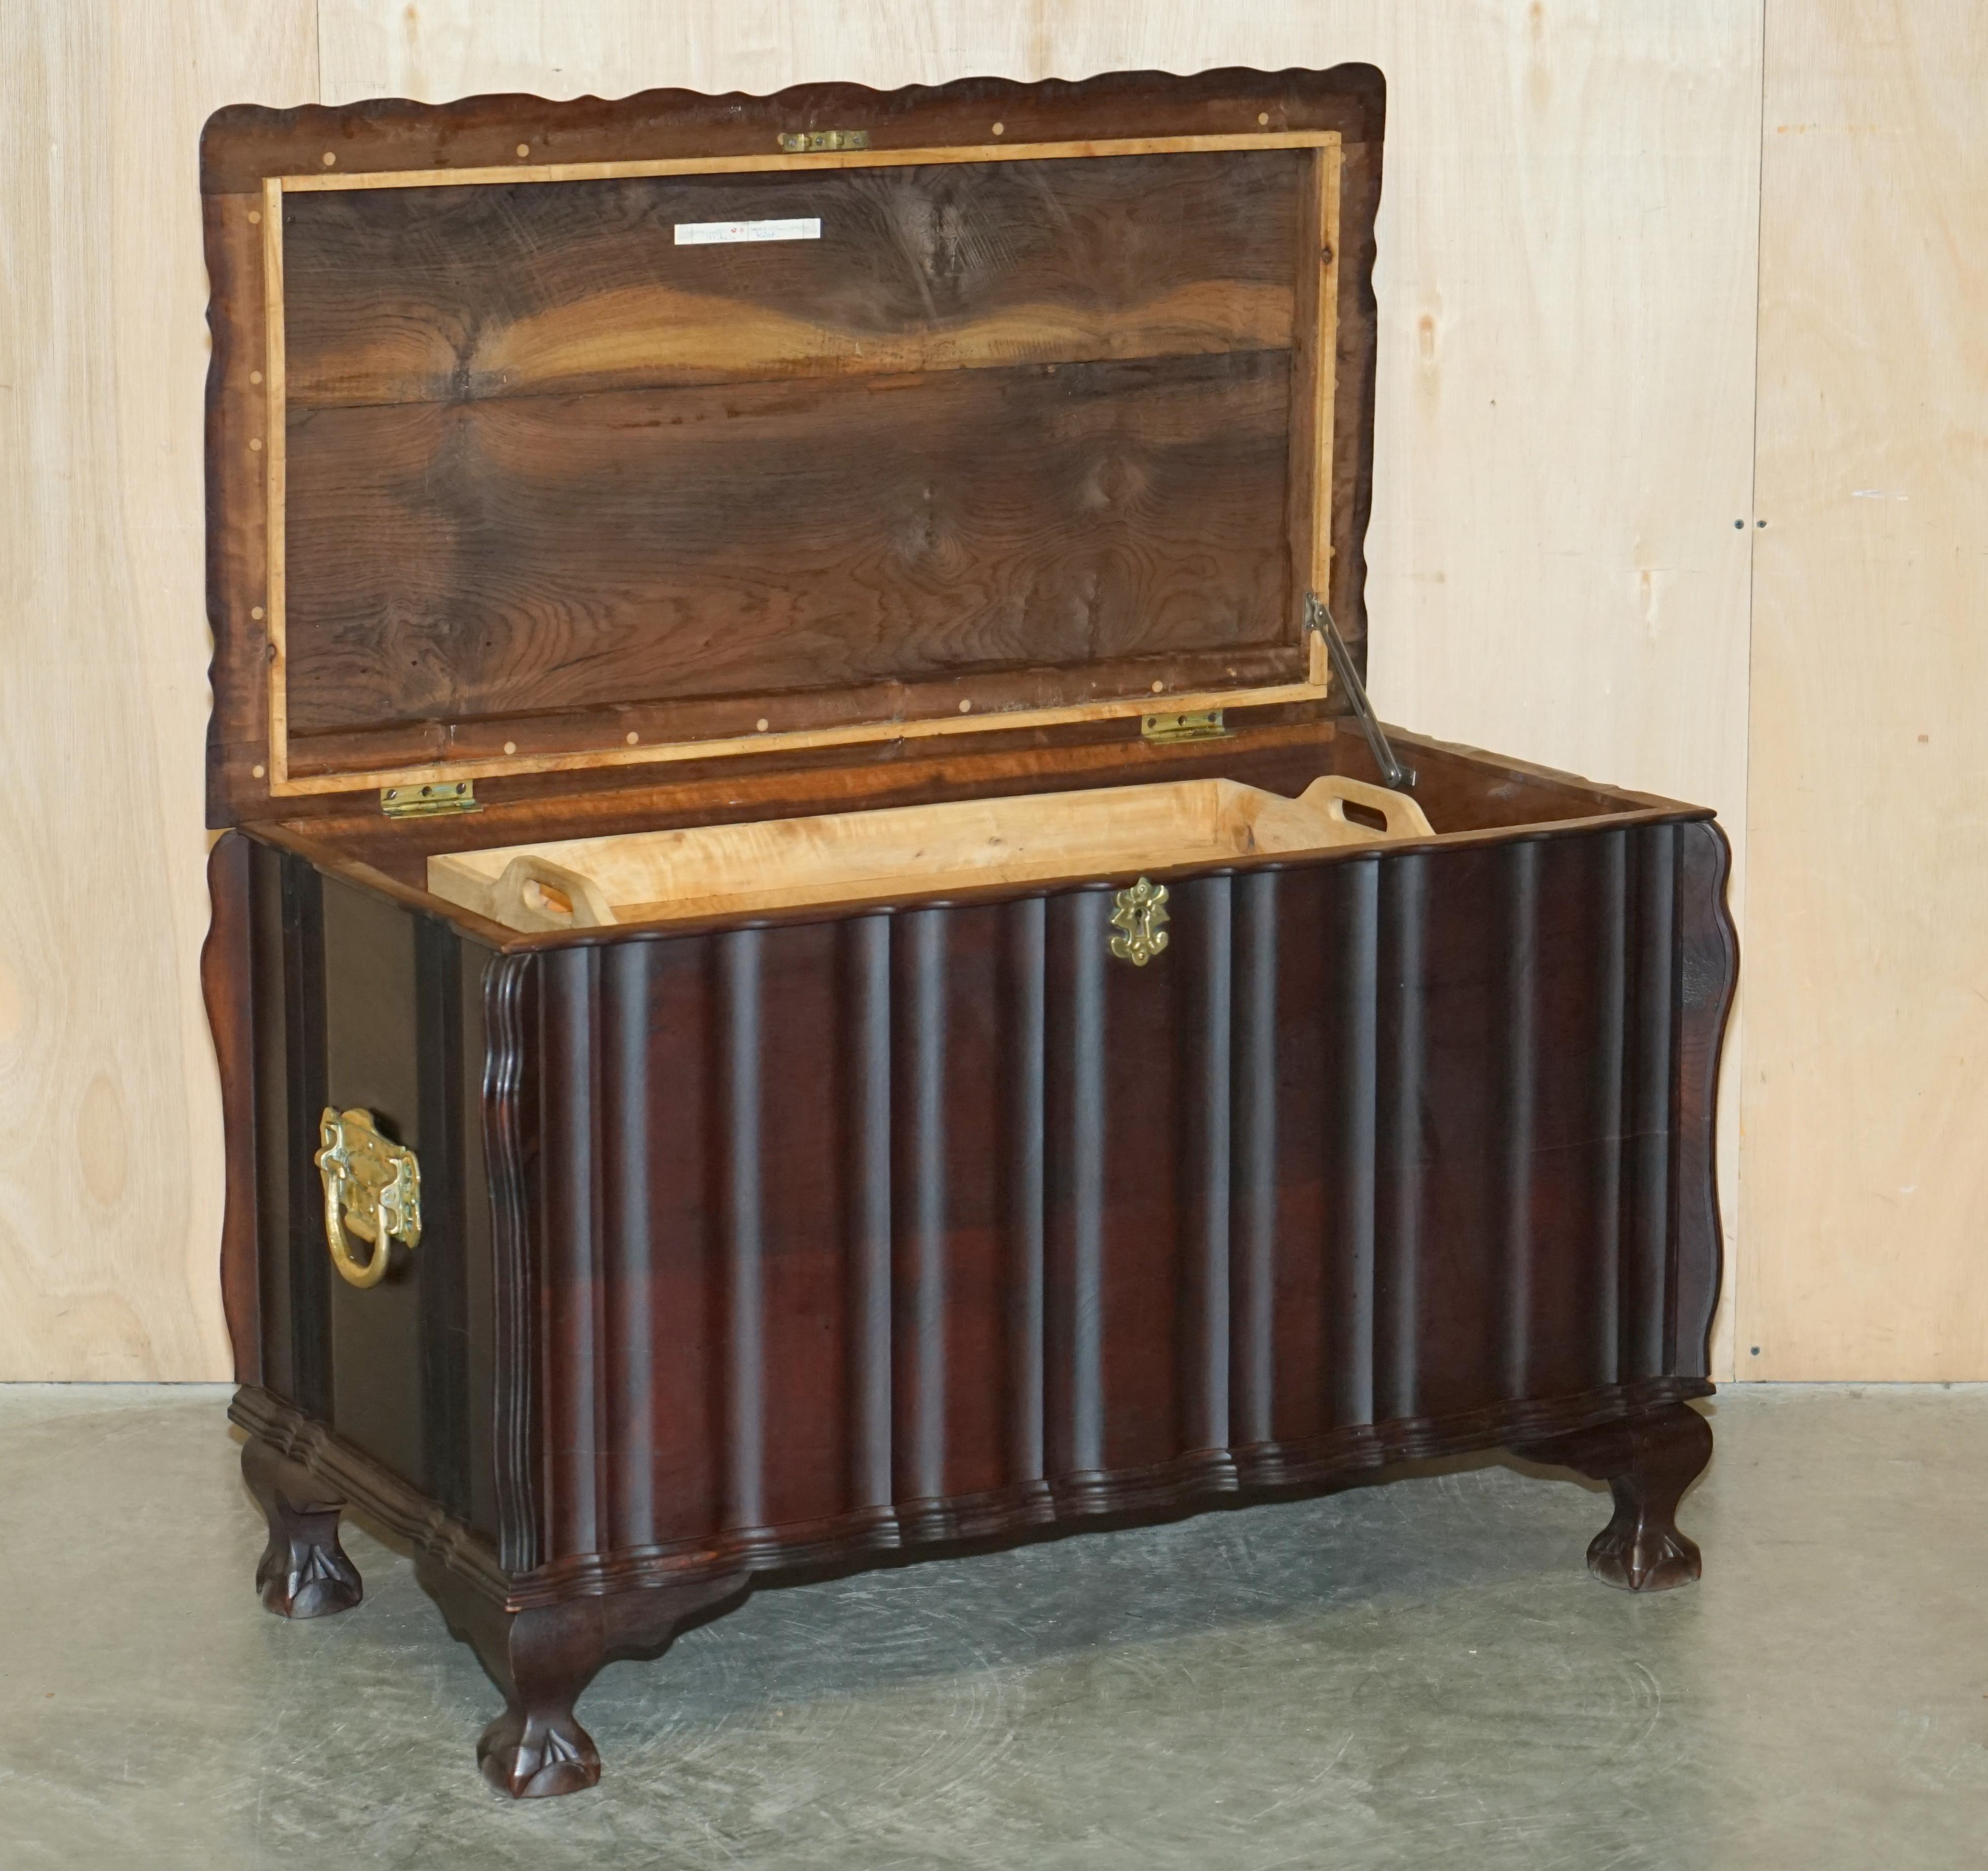 ViNTAGE HAND CARved HARDWOOD TRUNK OR CHEST WITH ORNATE OVERSIZED BRASS FITTINGS im Angebot 9